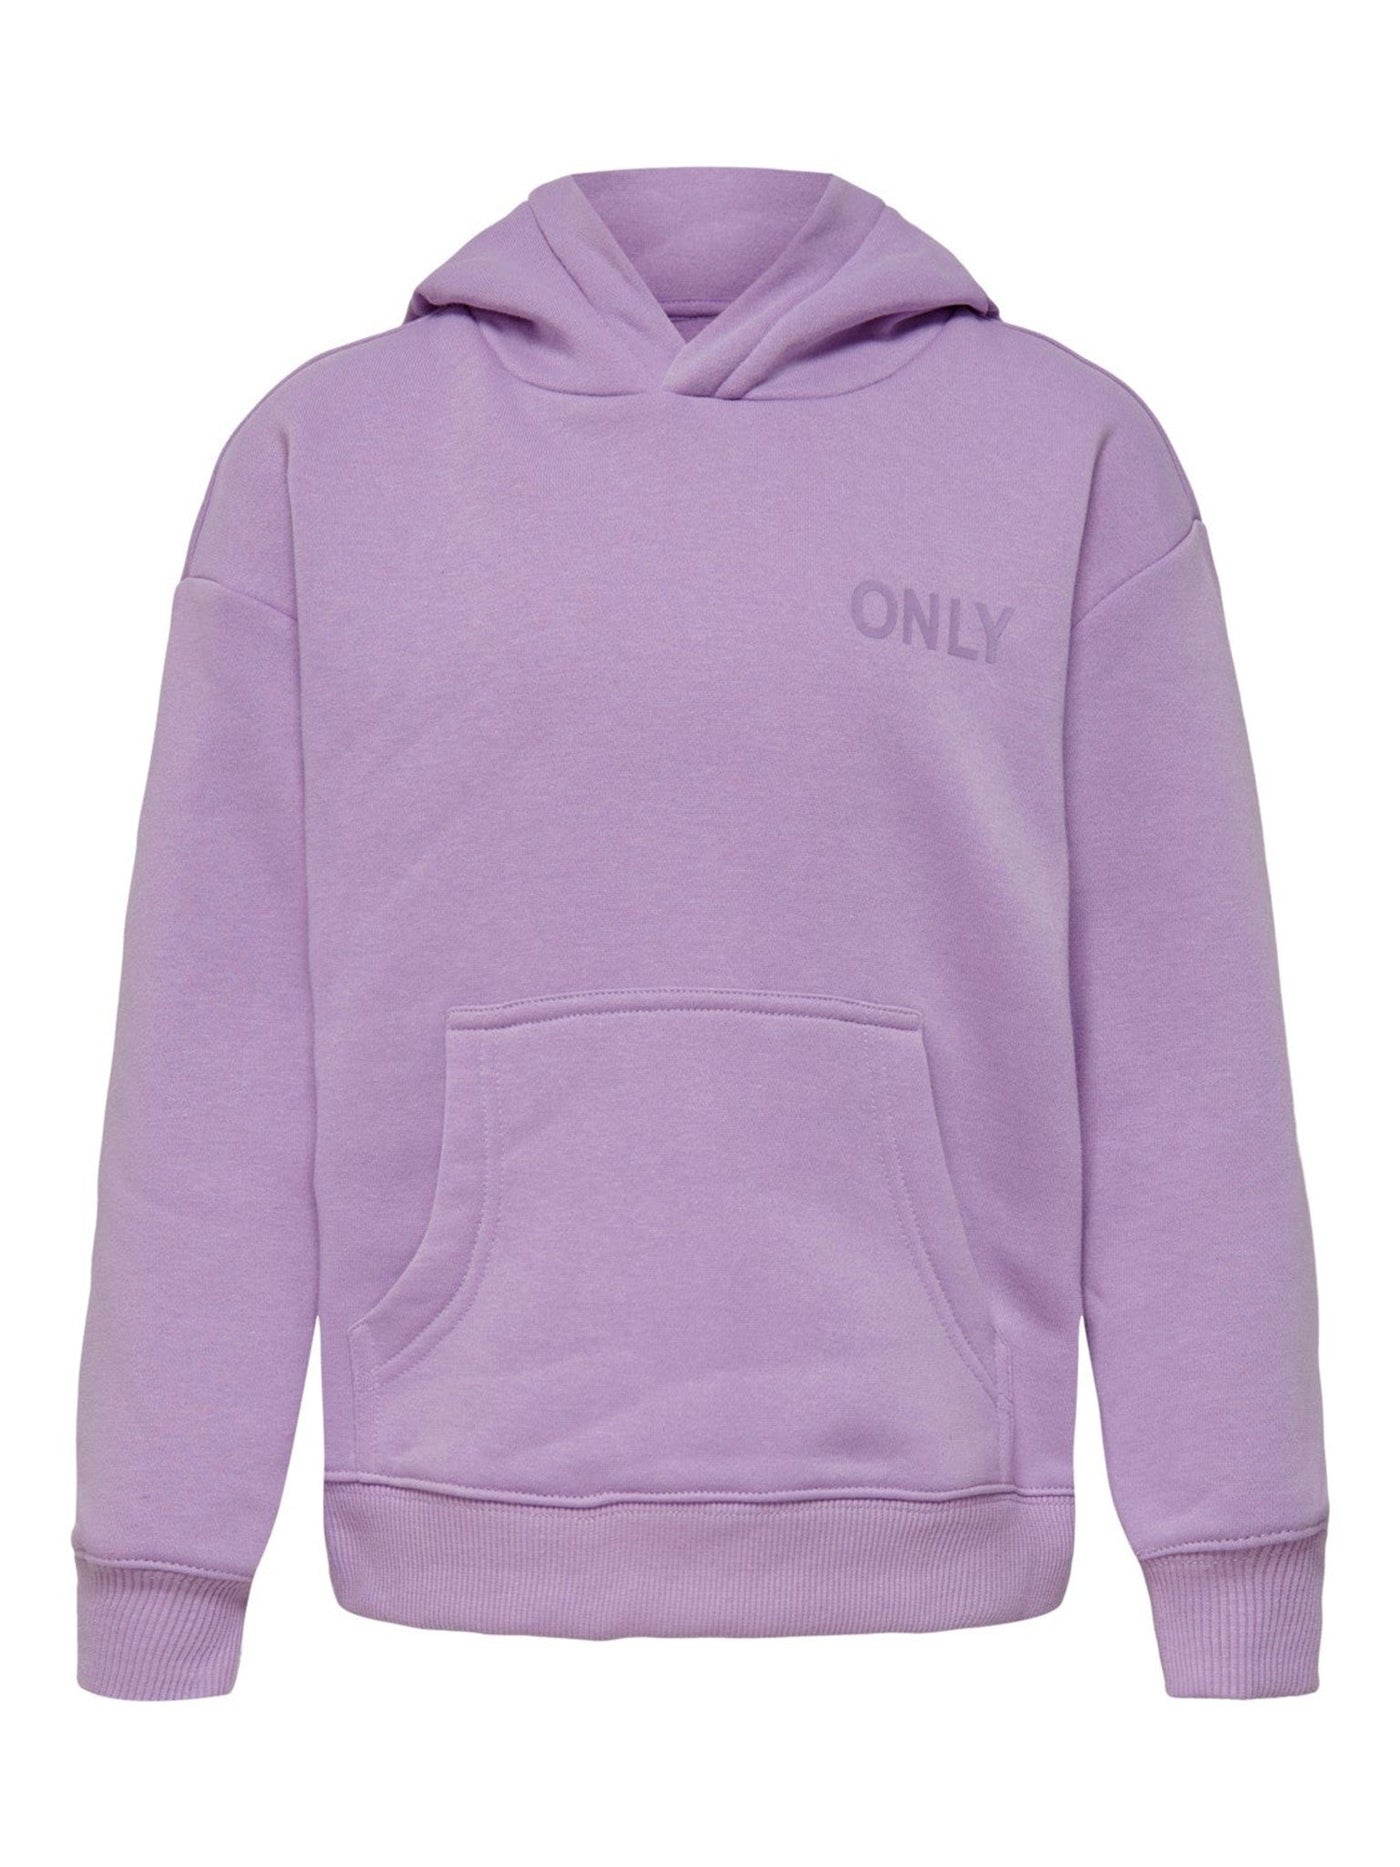 Every Life Small Logo Hoodie - Krokusblad - Kids Only - Rosa